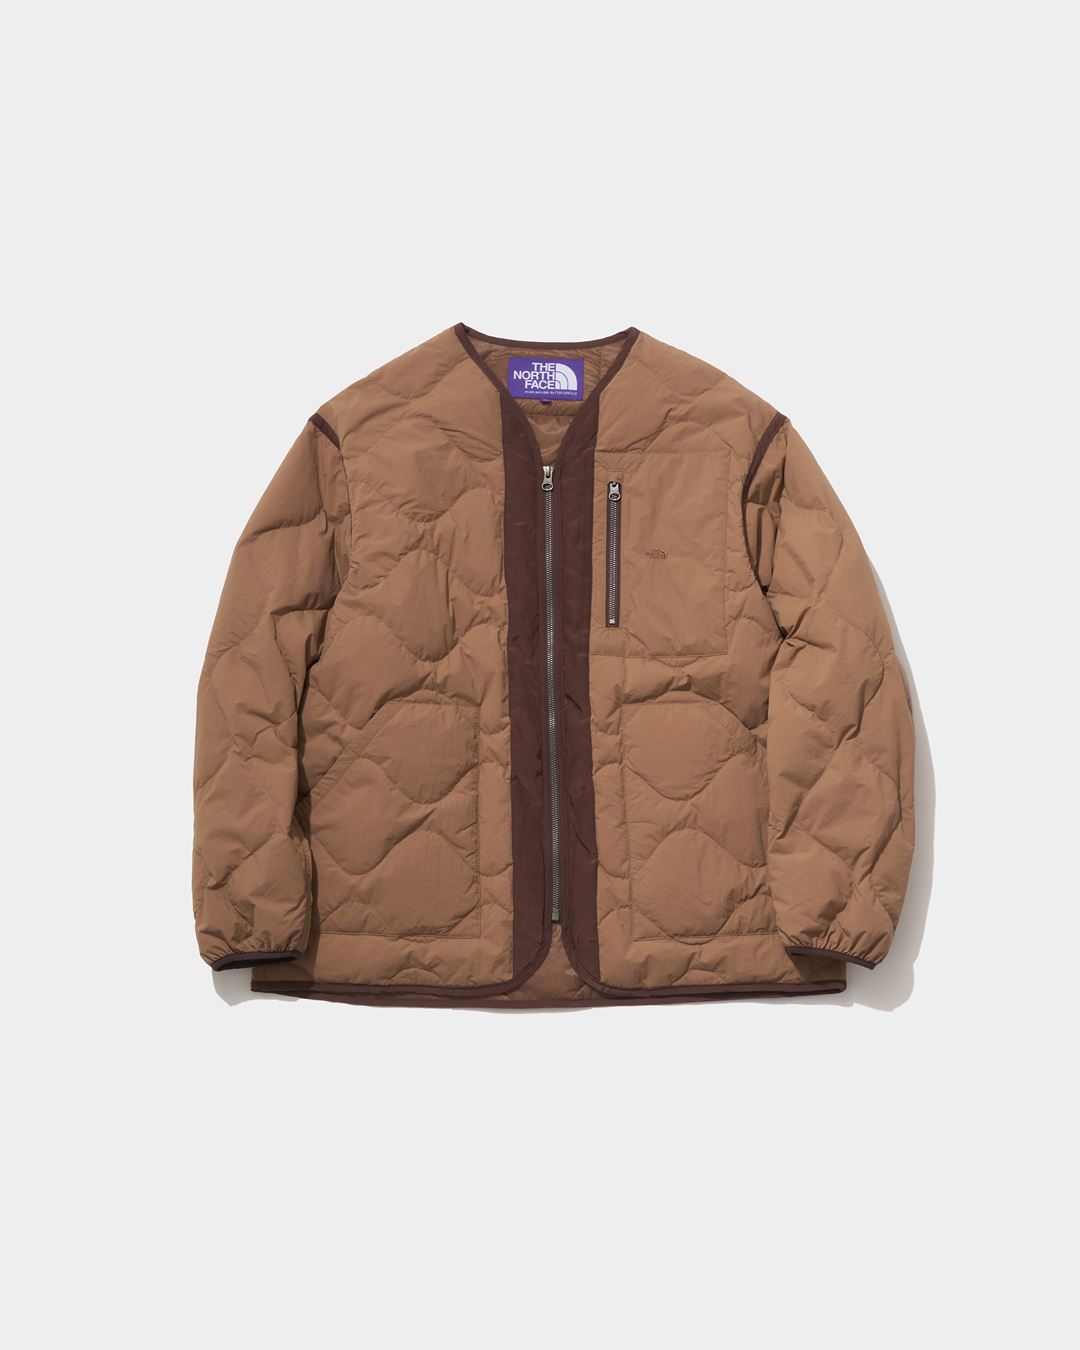 THE NORTH FACE PURPLE LABEL / Featured Product vol.15